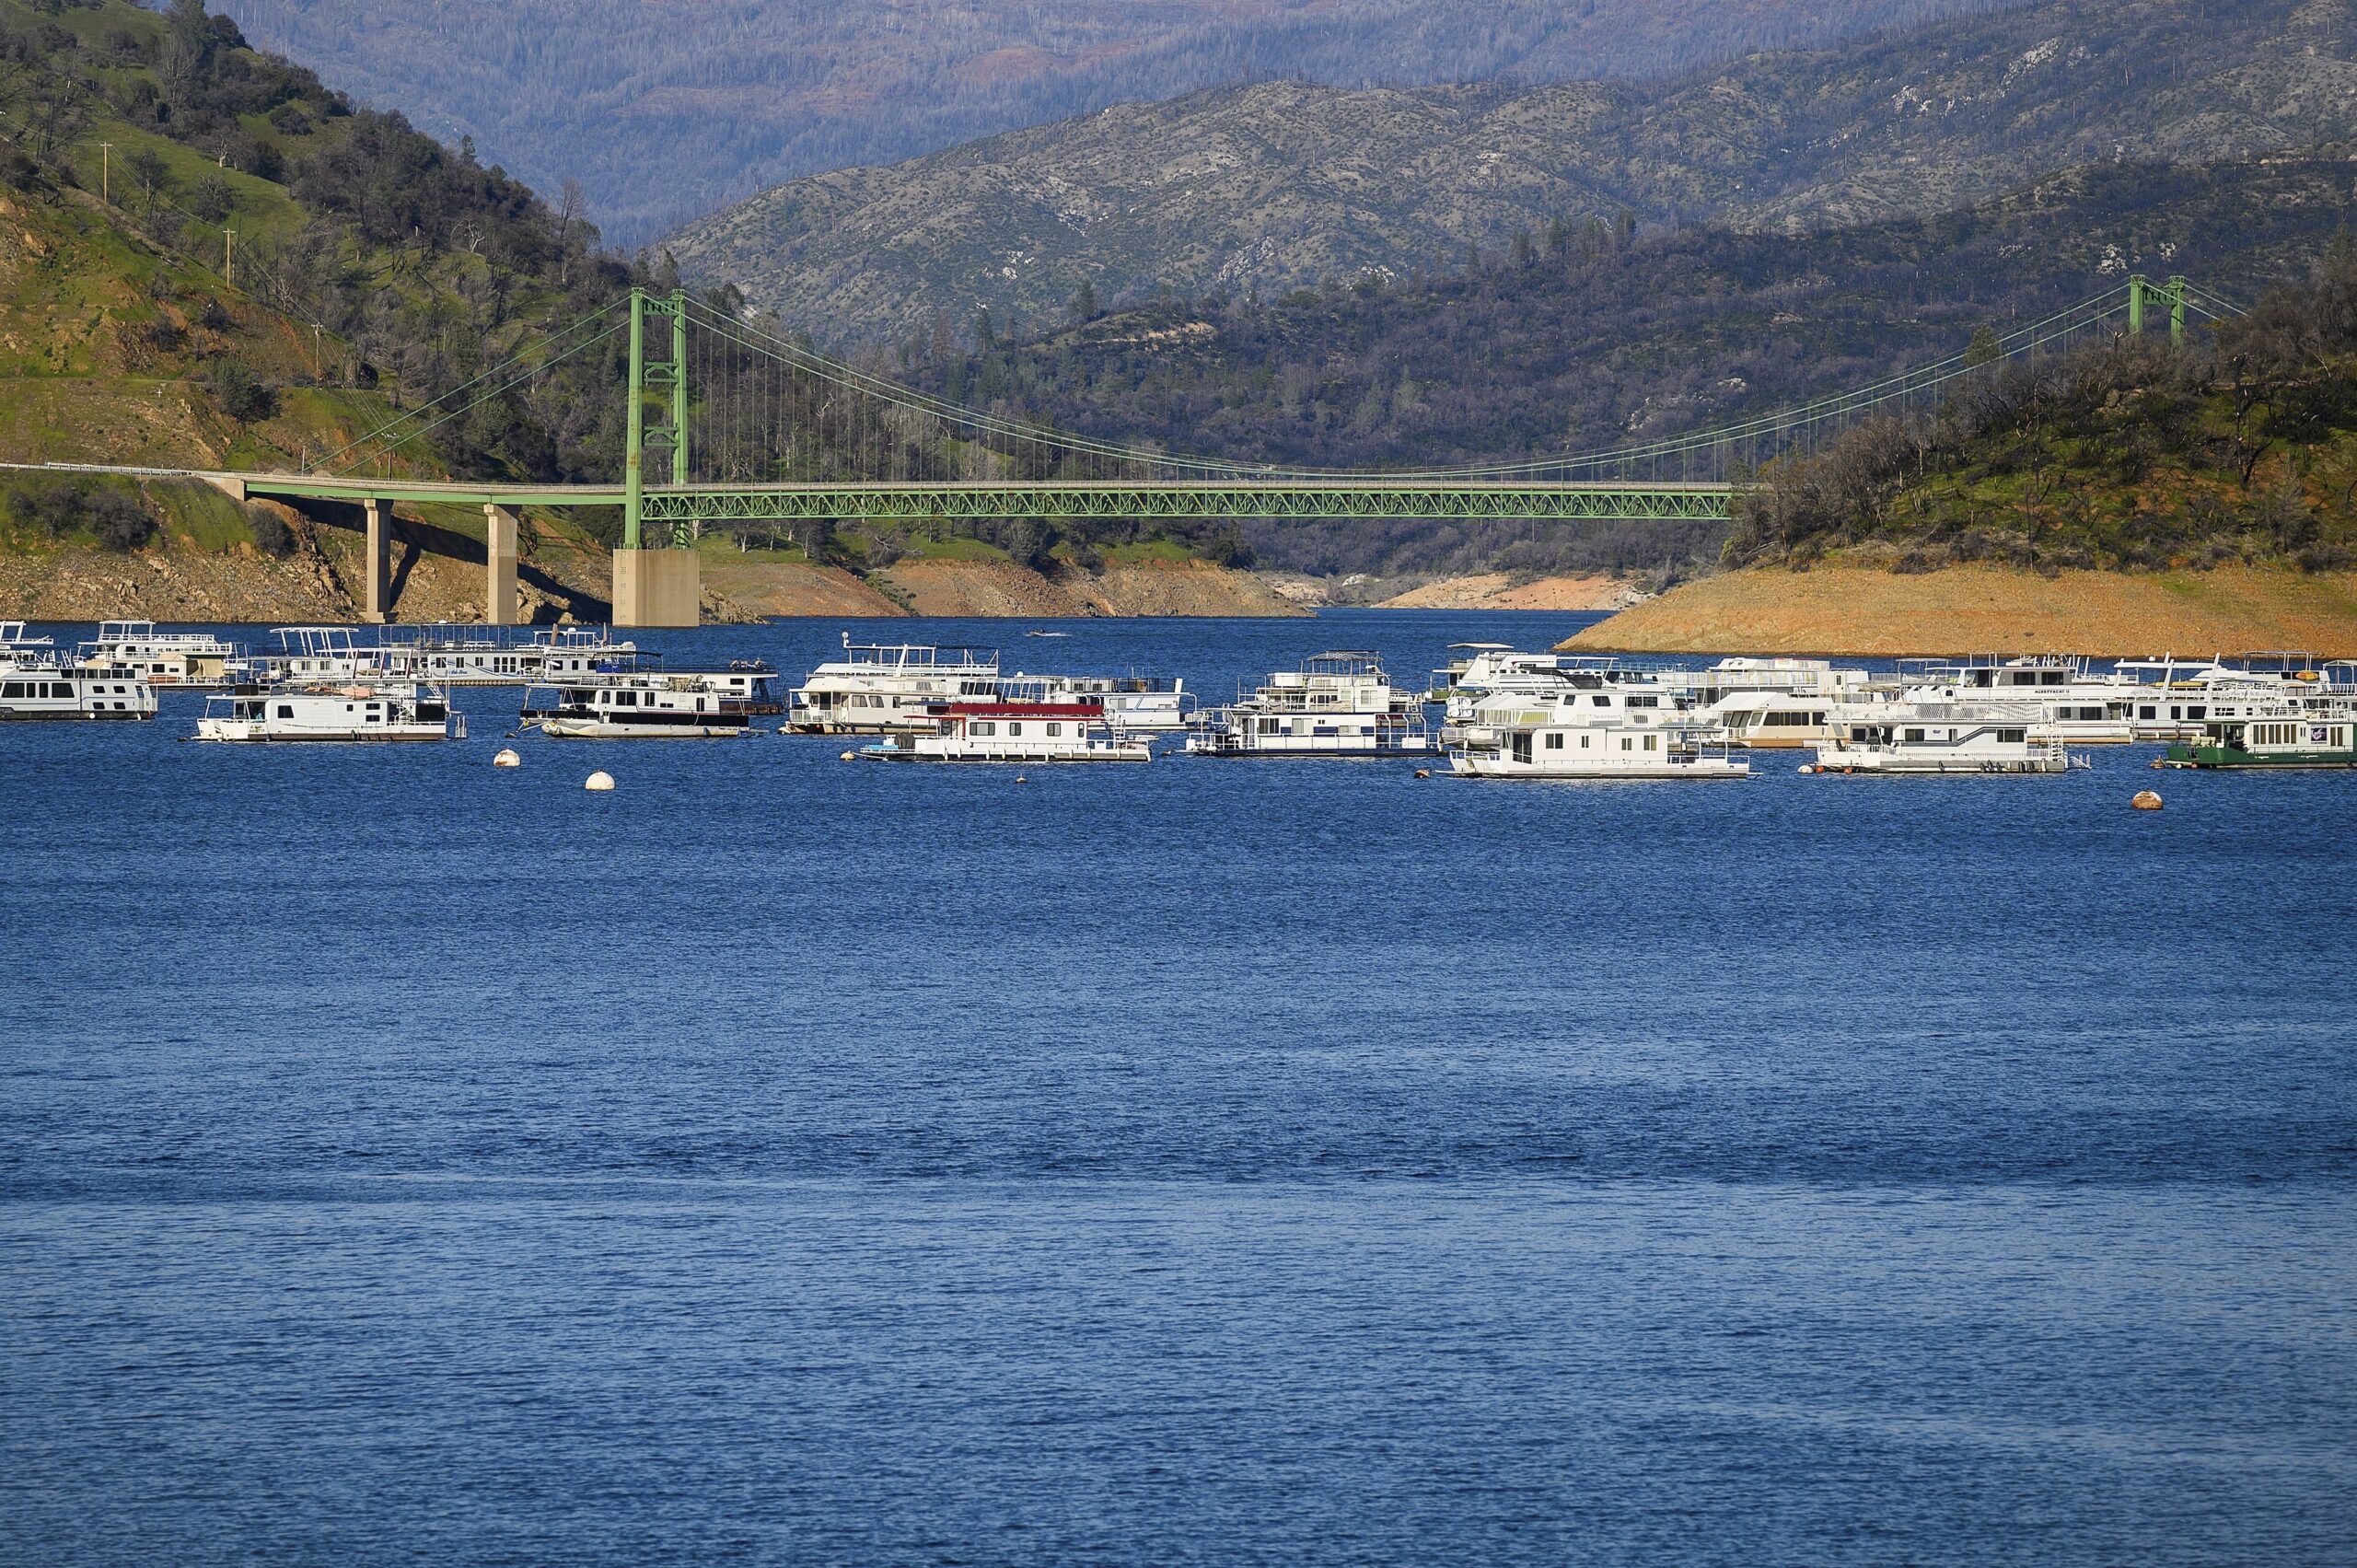 Houseboats moored on Oroville Lake with Bidwell Bridge in the background.